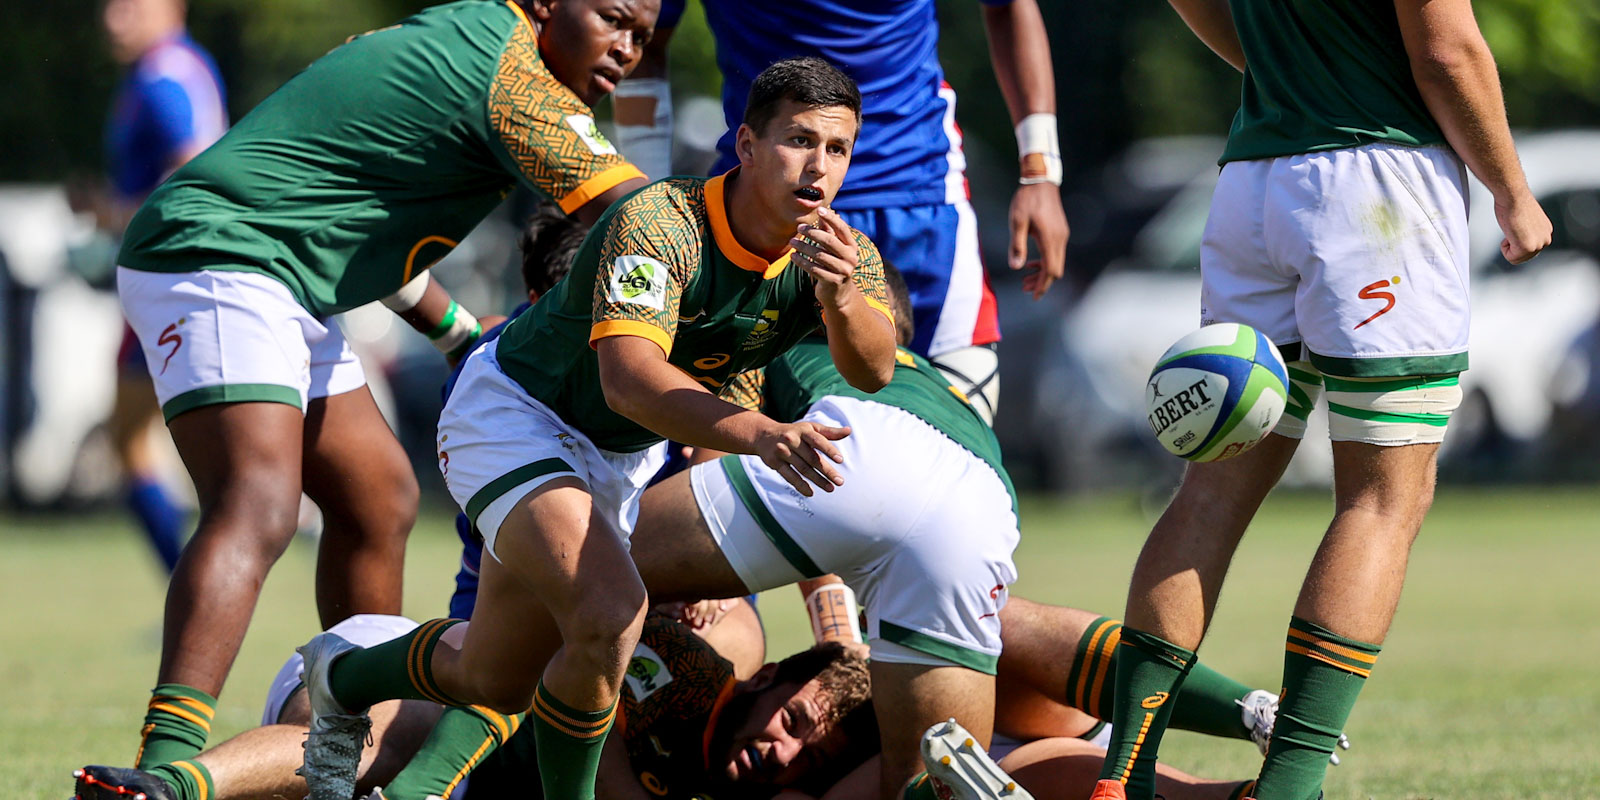 Niel le Roux is also back for his second stint at the SA Rugby Academy.